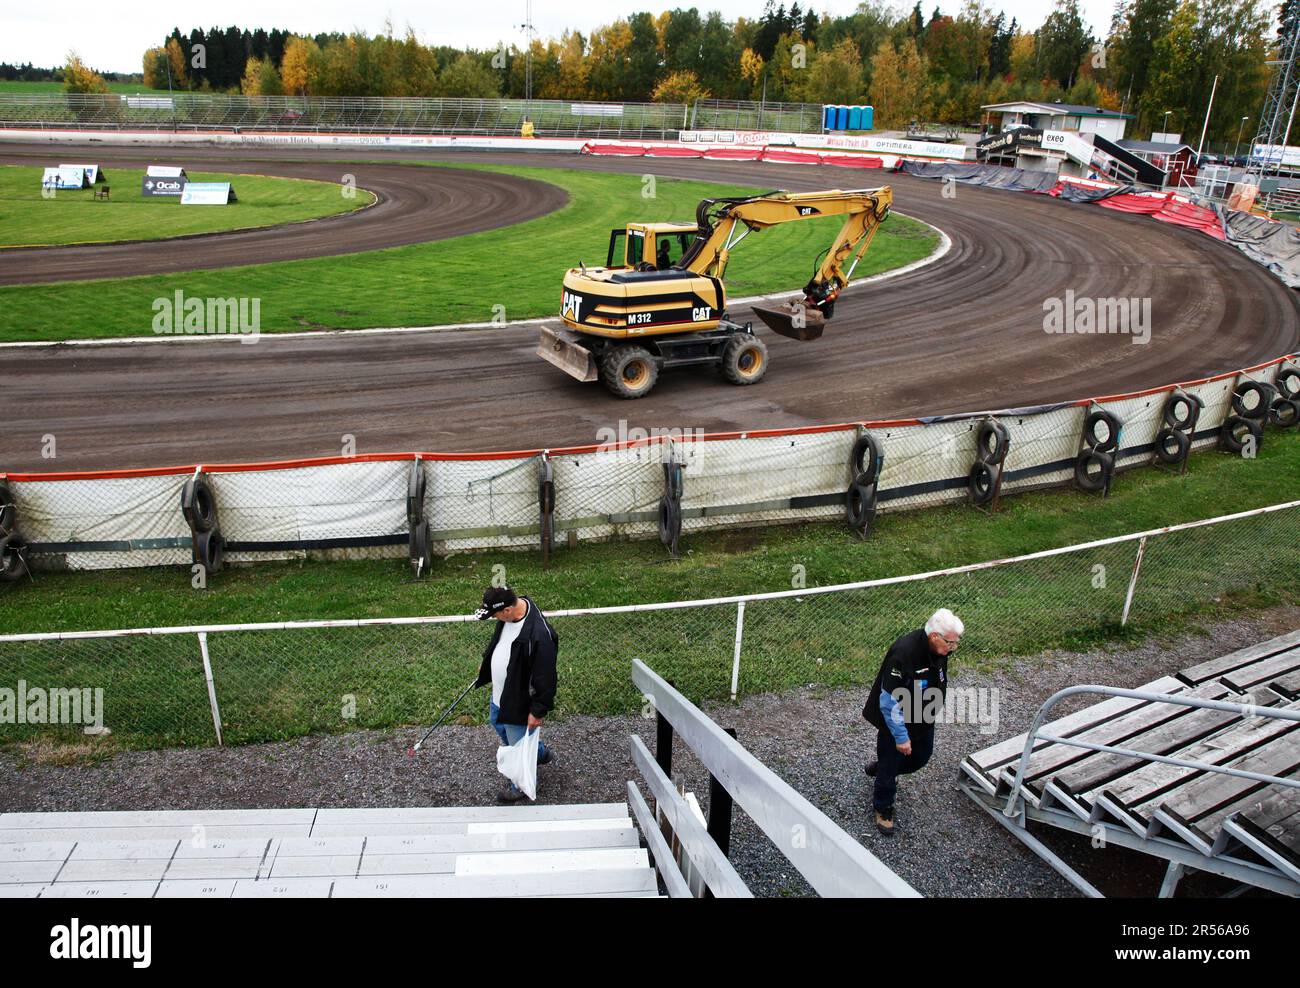 The speedway arena for the speedway team Piraterna, Motala, Sweden. Stock Photo